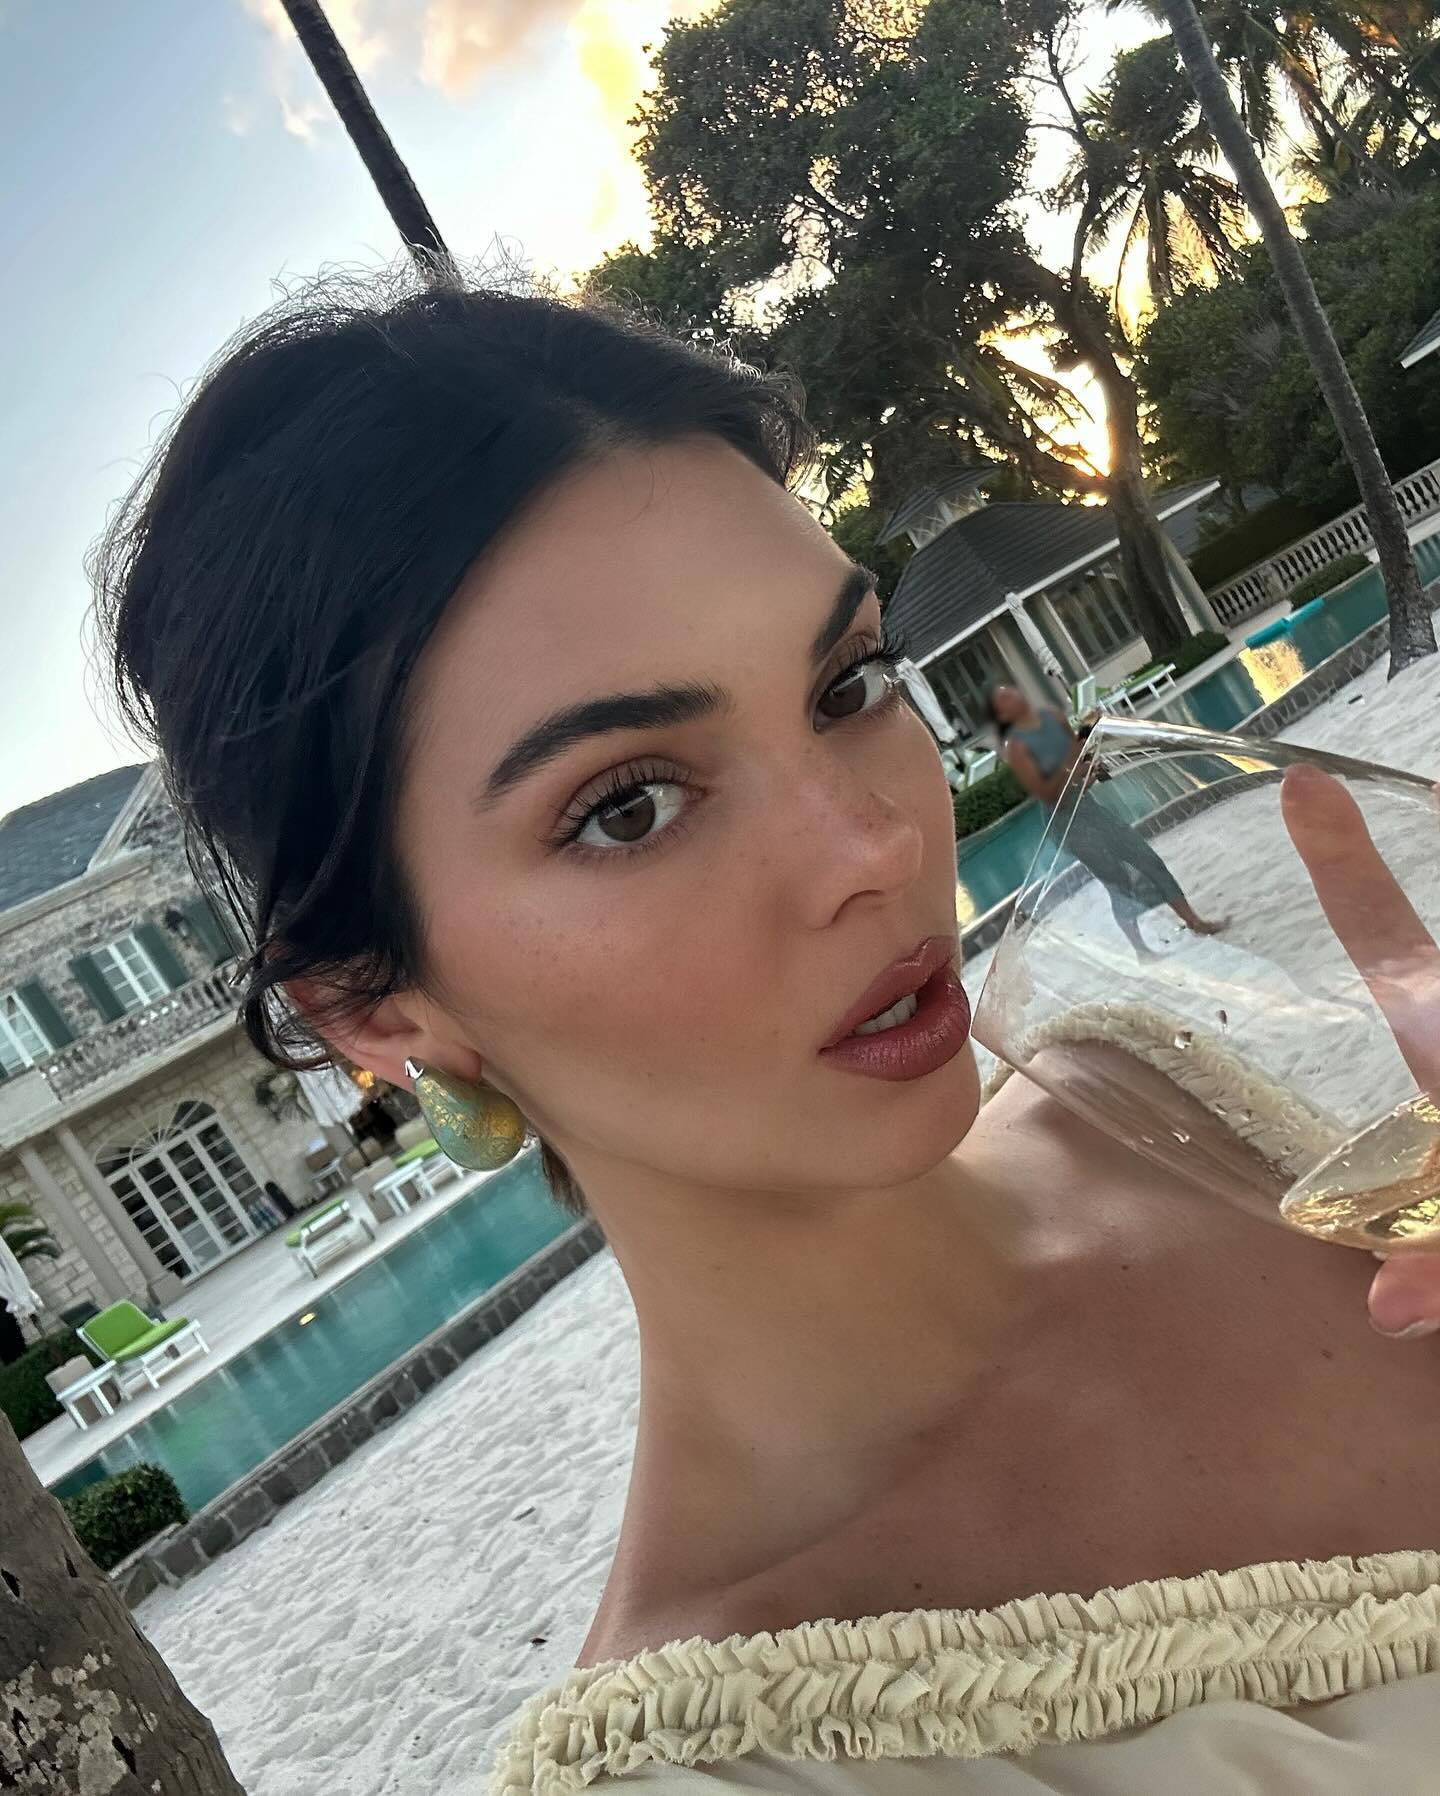 Last month, fans speculated that a post Kendall shared confirmed her and Bad Bunny's breakup